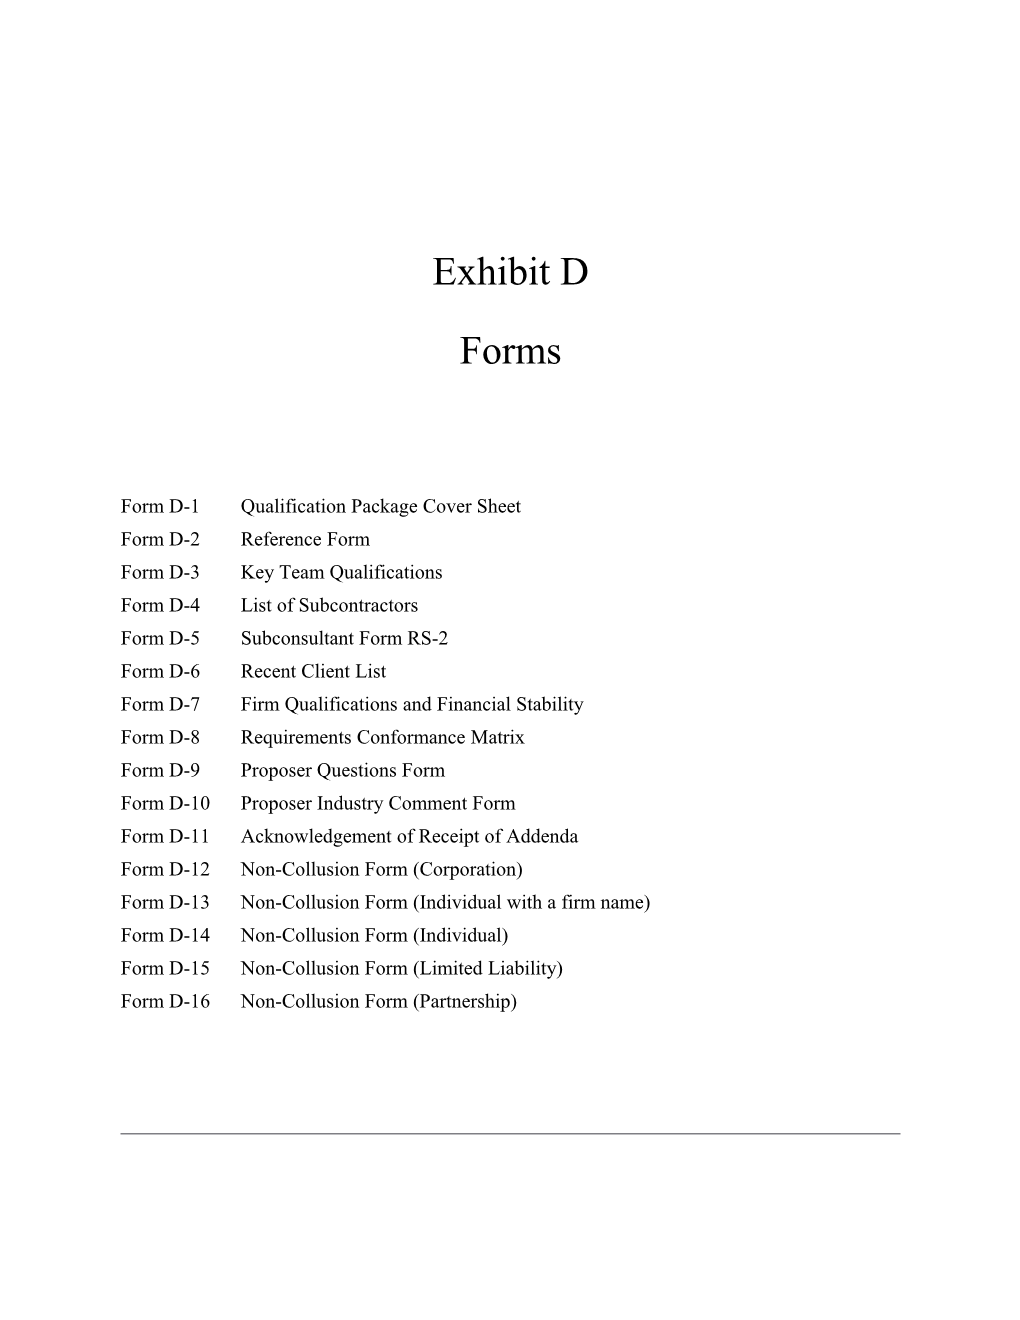 Form D-1 Qualification Package Cover Sheet